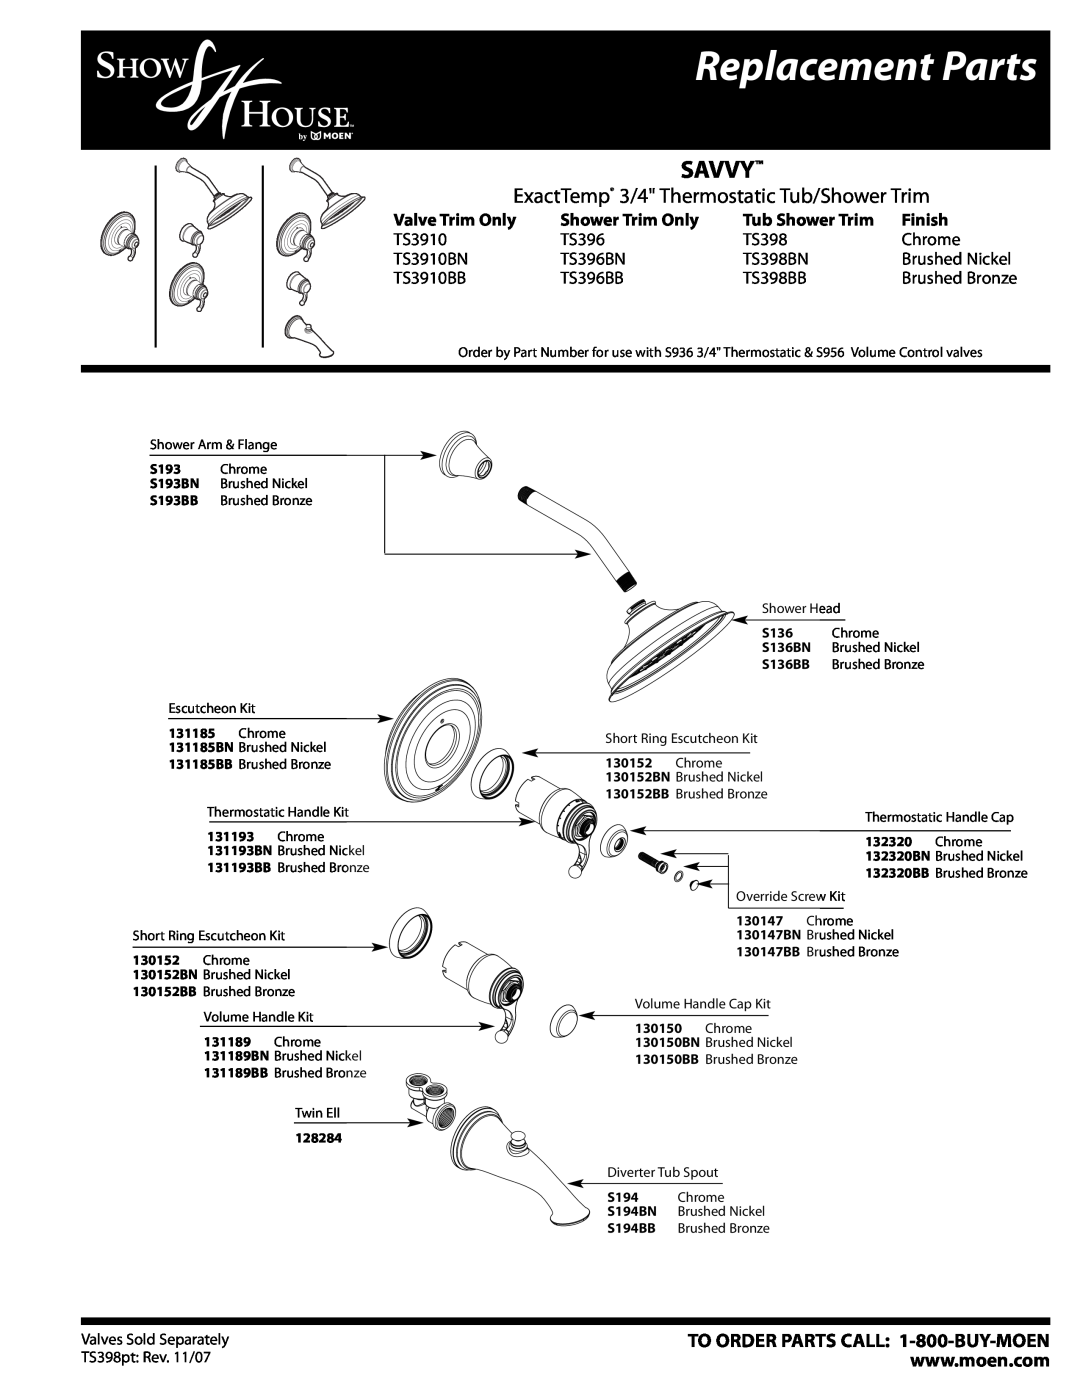 Moen TS398BB manual Replacement Parts, Savvy, ExactTemp 3/4 Thermostatic Tub/Shower Trim, Valve Trim Only, Tub Shower Trim 